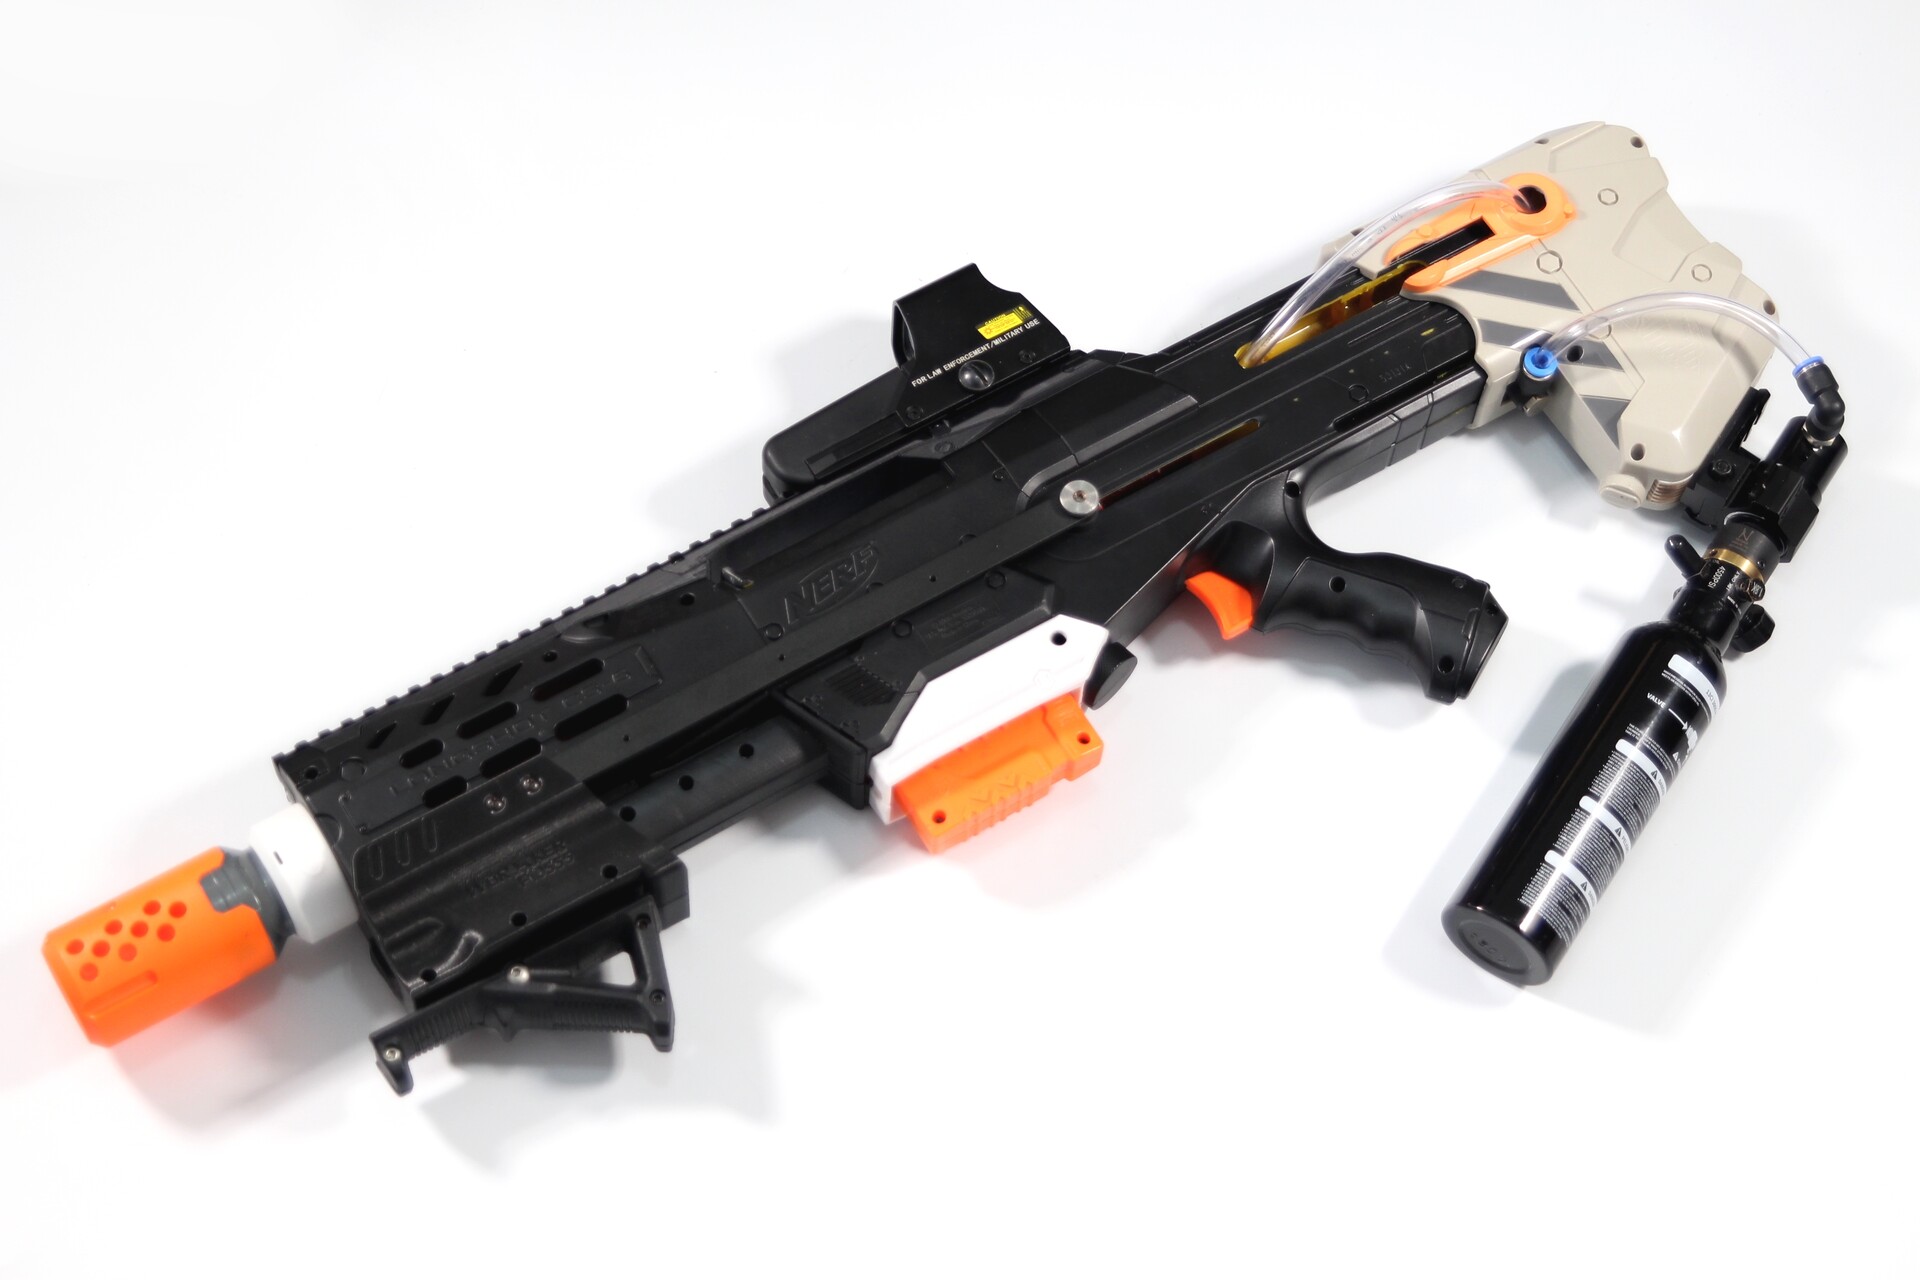 Amped Airsoft Custom HPA SUB5 F2 Pistol Build